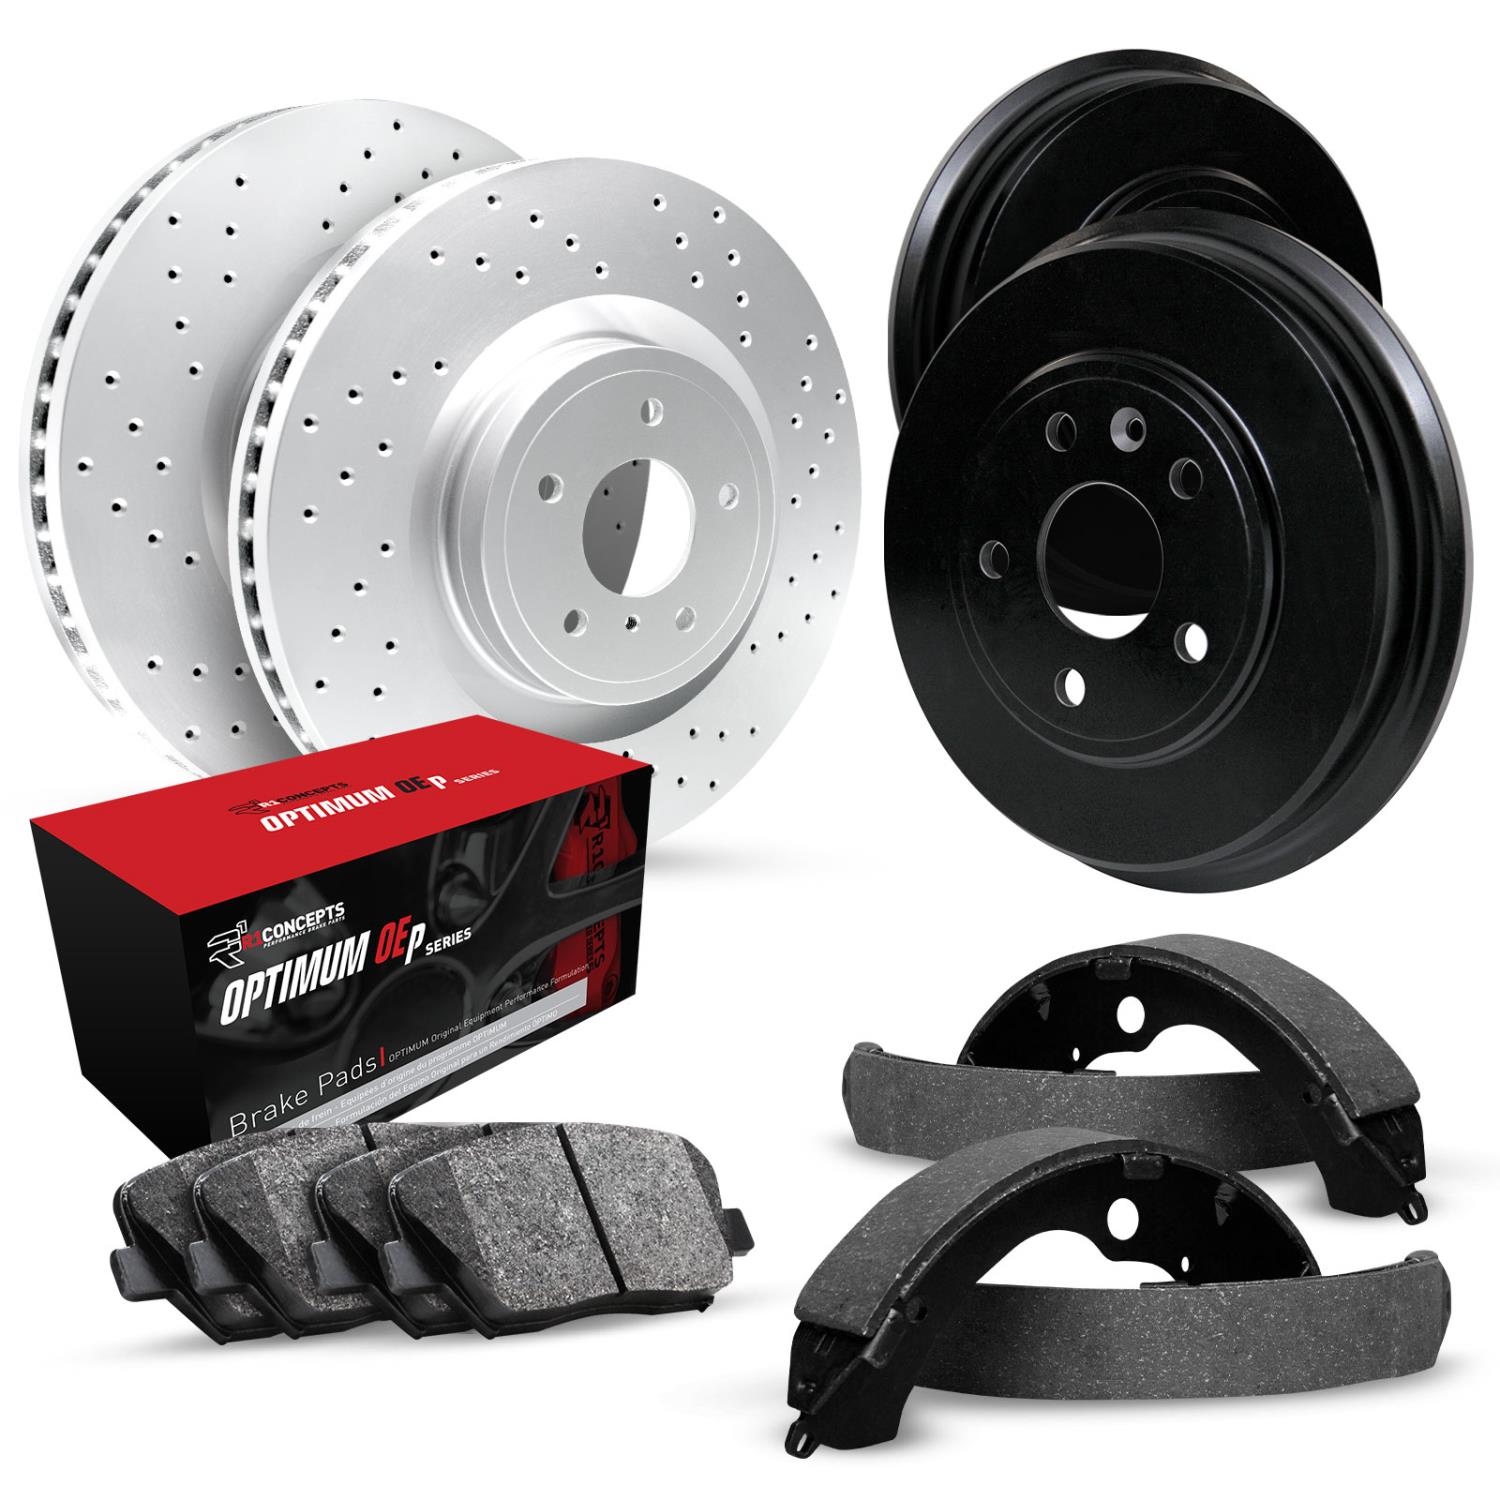 GEO-Carbon Drilled Brake Rotor & Drum Set w/Optimum OE Pads & Shoes, 1976-1978 GM, Position: Front & Rear